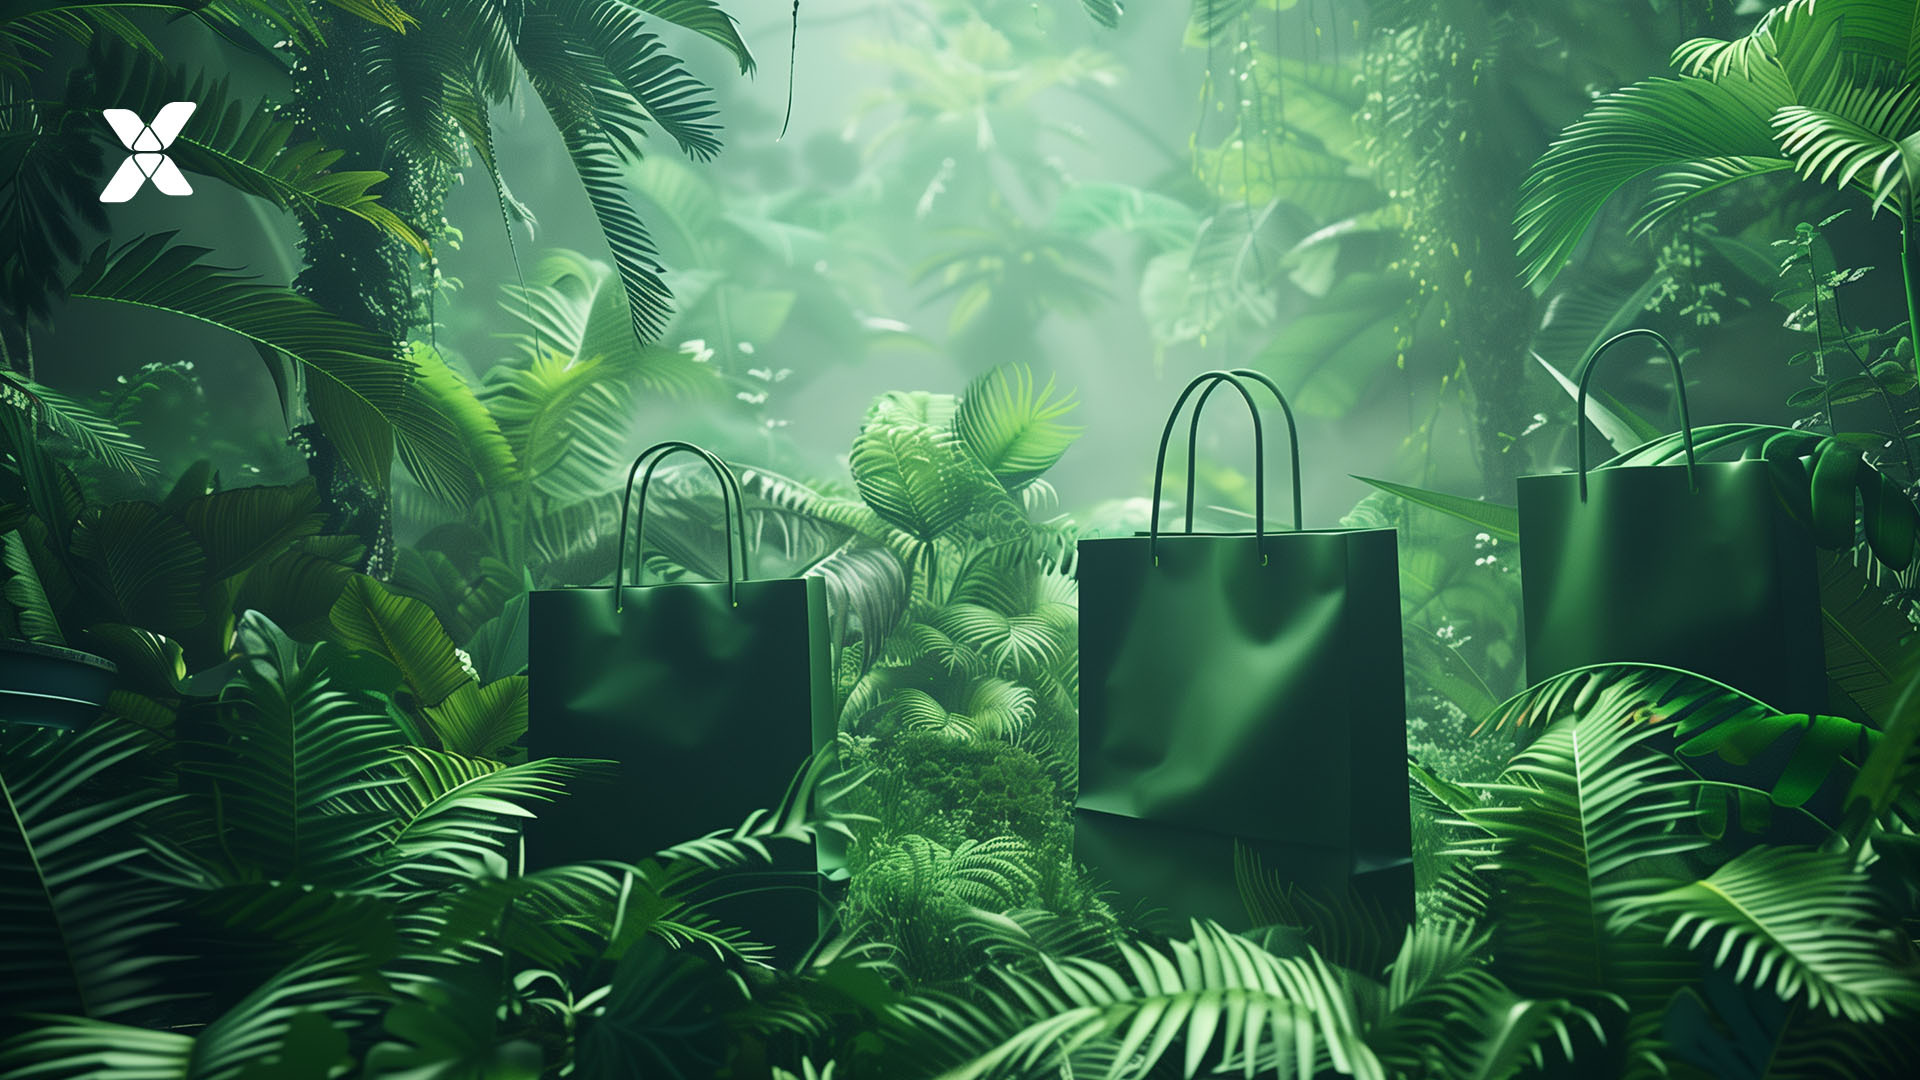 Green shopping bags in the jungle